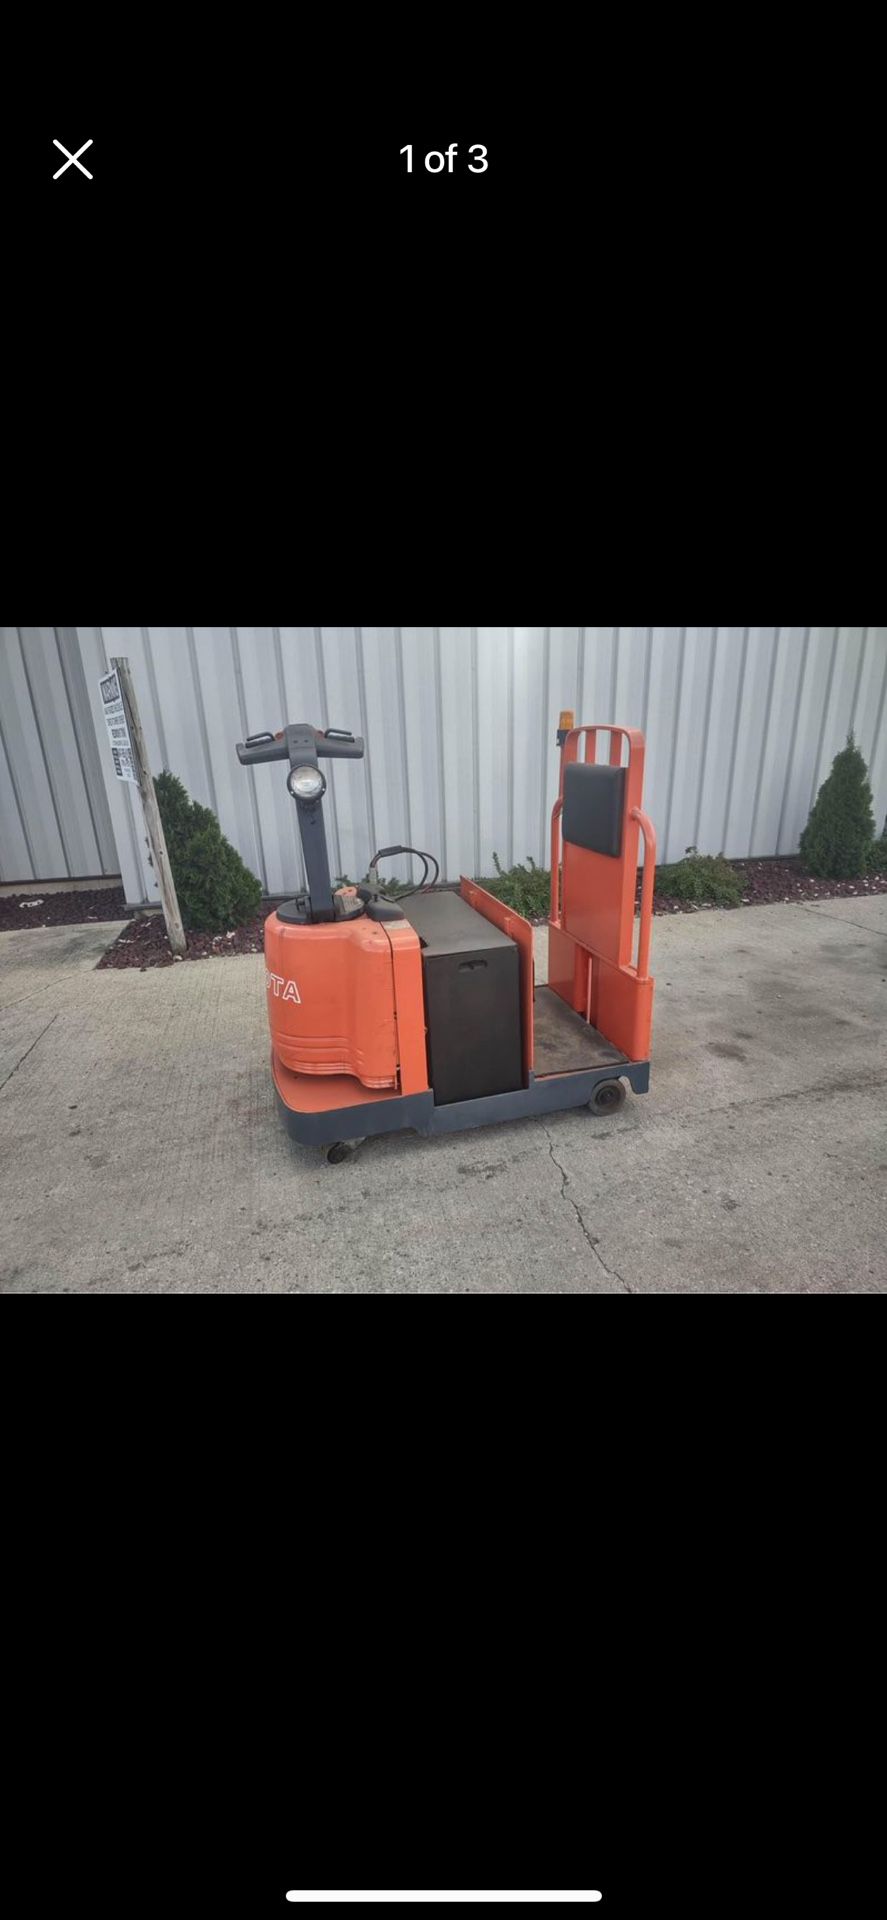 FOR SALE A TOYOTA 7TB50 ELECTRIC TUGGER, SERIAL 32468, 24V USED BATTERY.  FORKLIFT